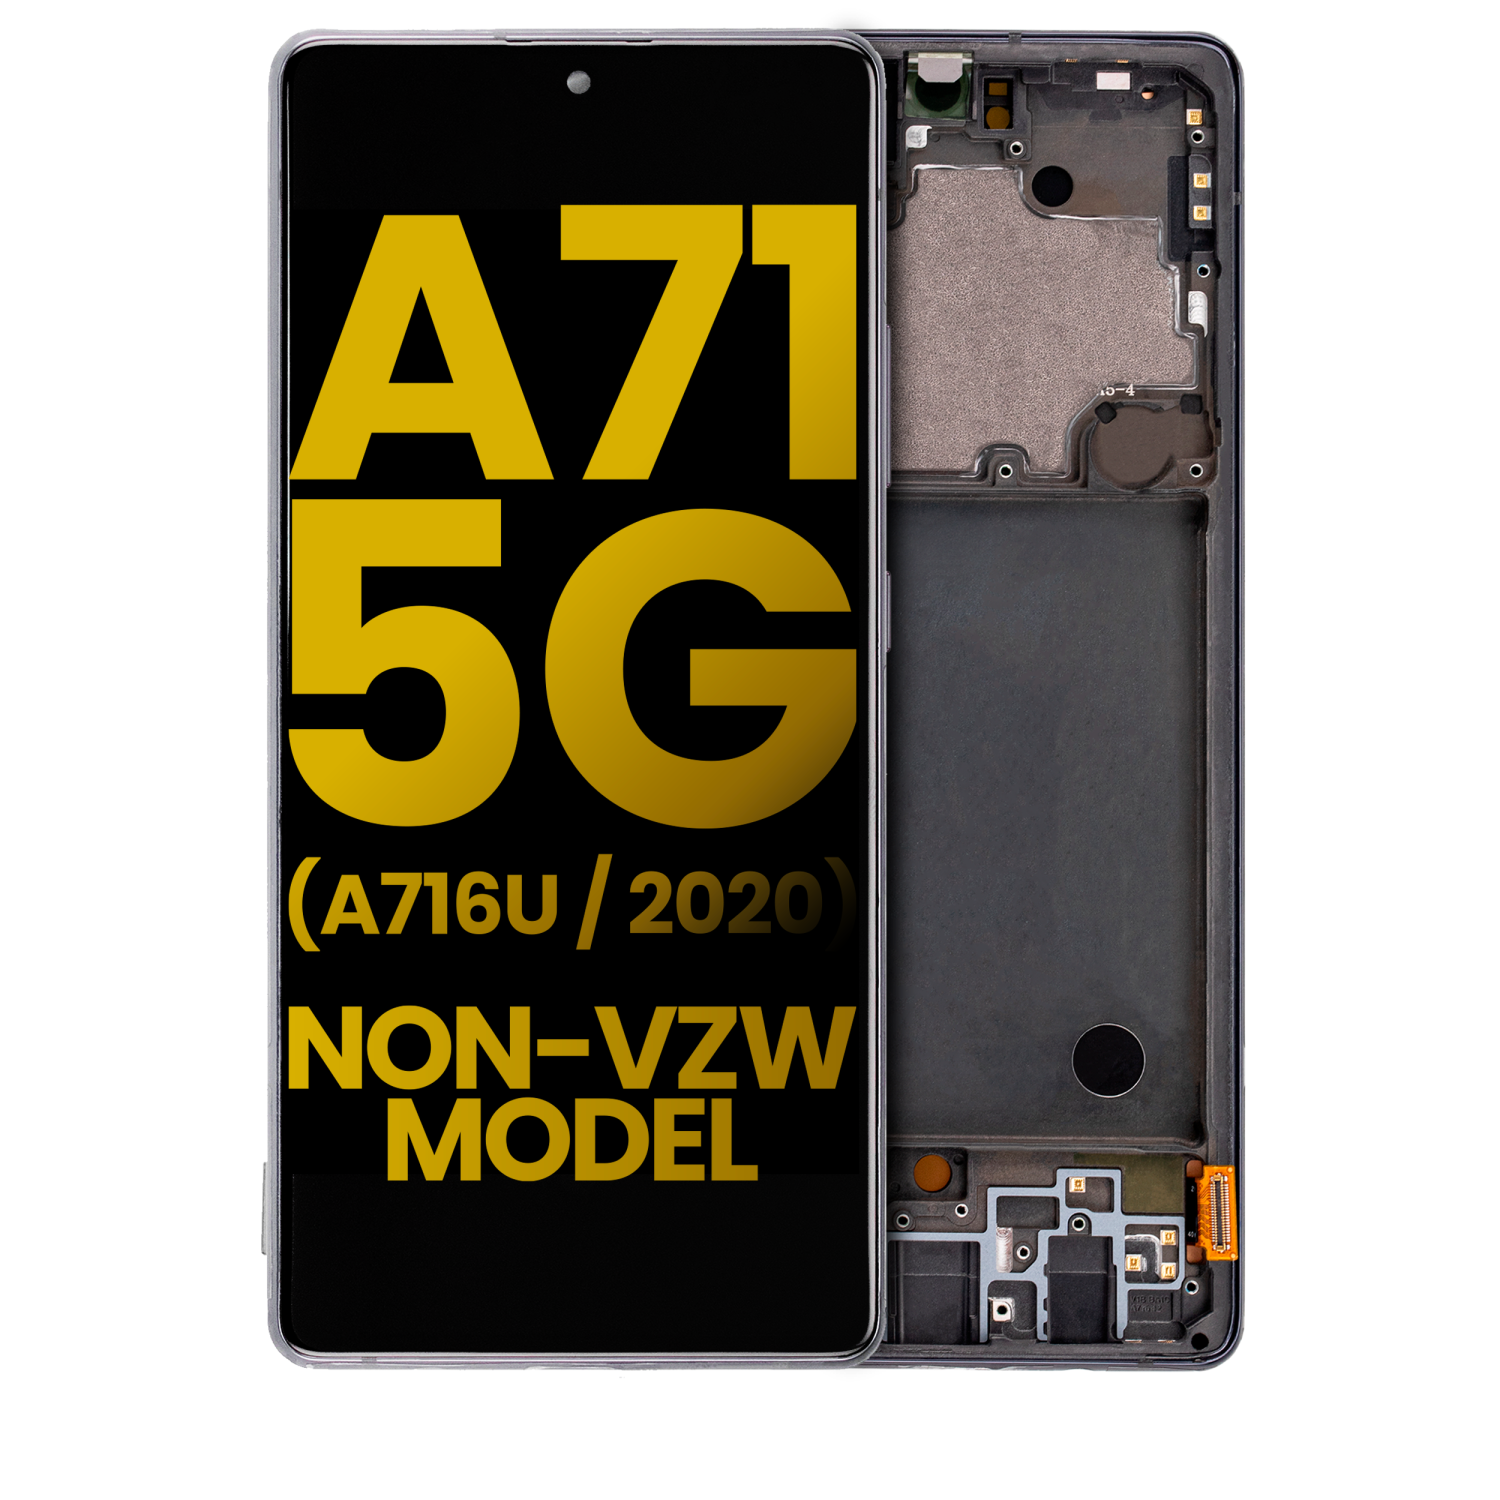 Refurbished (Excellent) - Replacement OLED Assembly With Frame Compatible For Samsung Galaxy A71 5G (A716U / 2020) (Prism Cube Black)